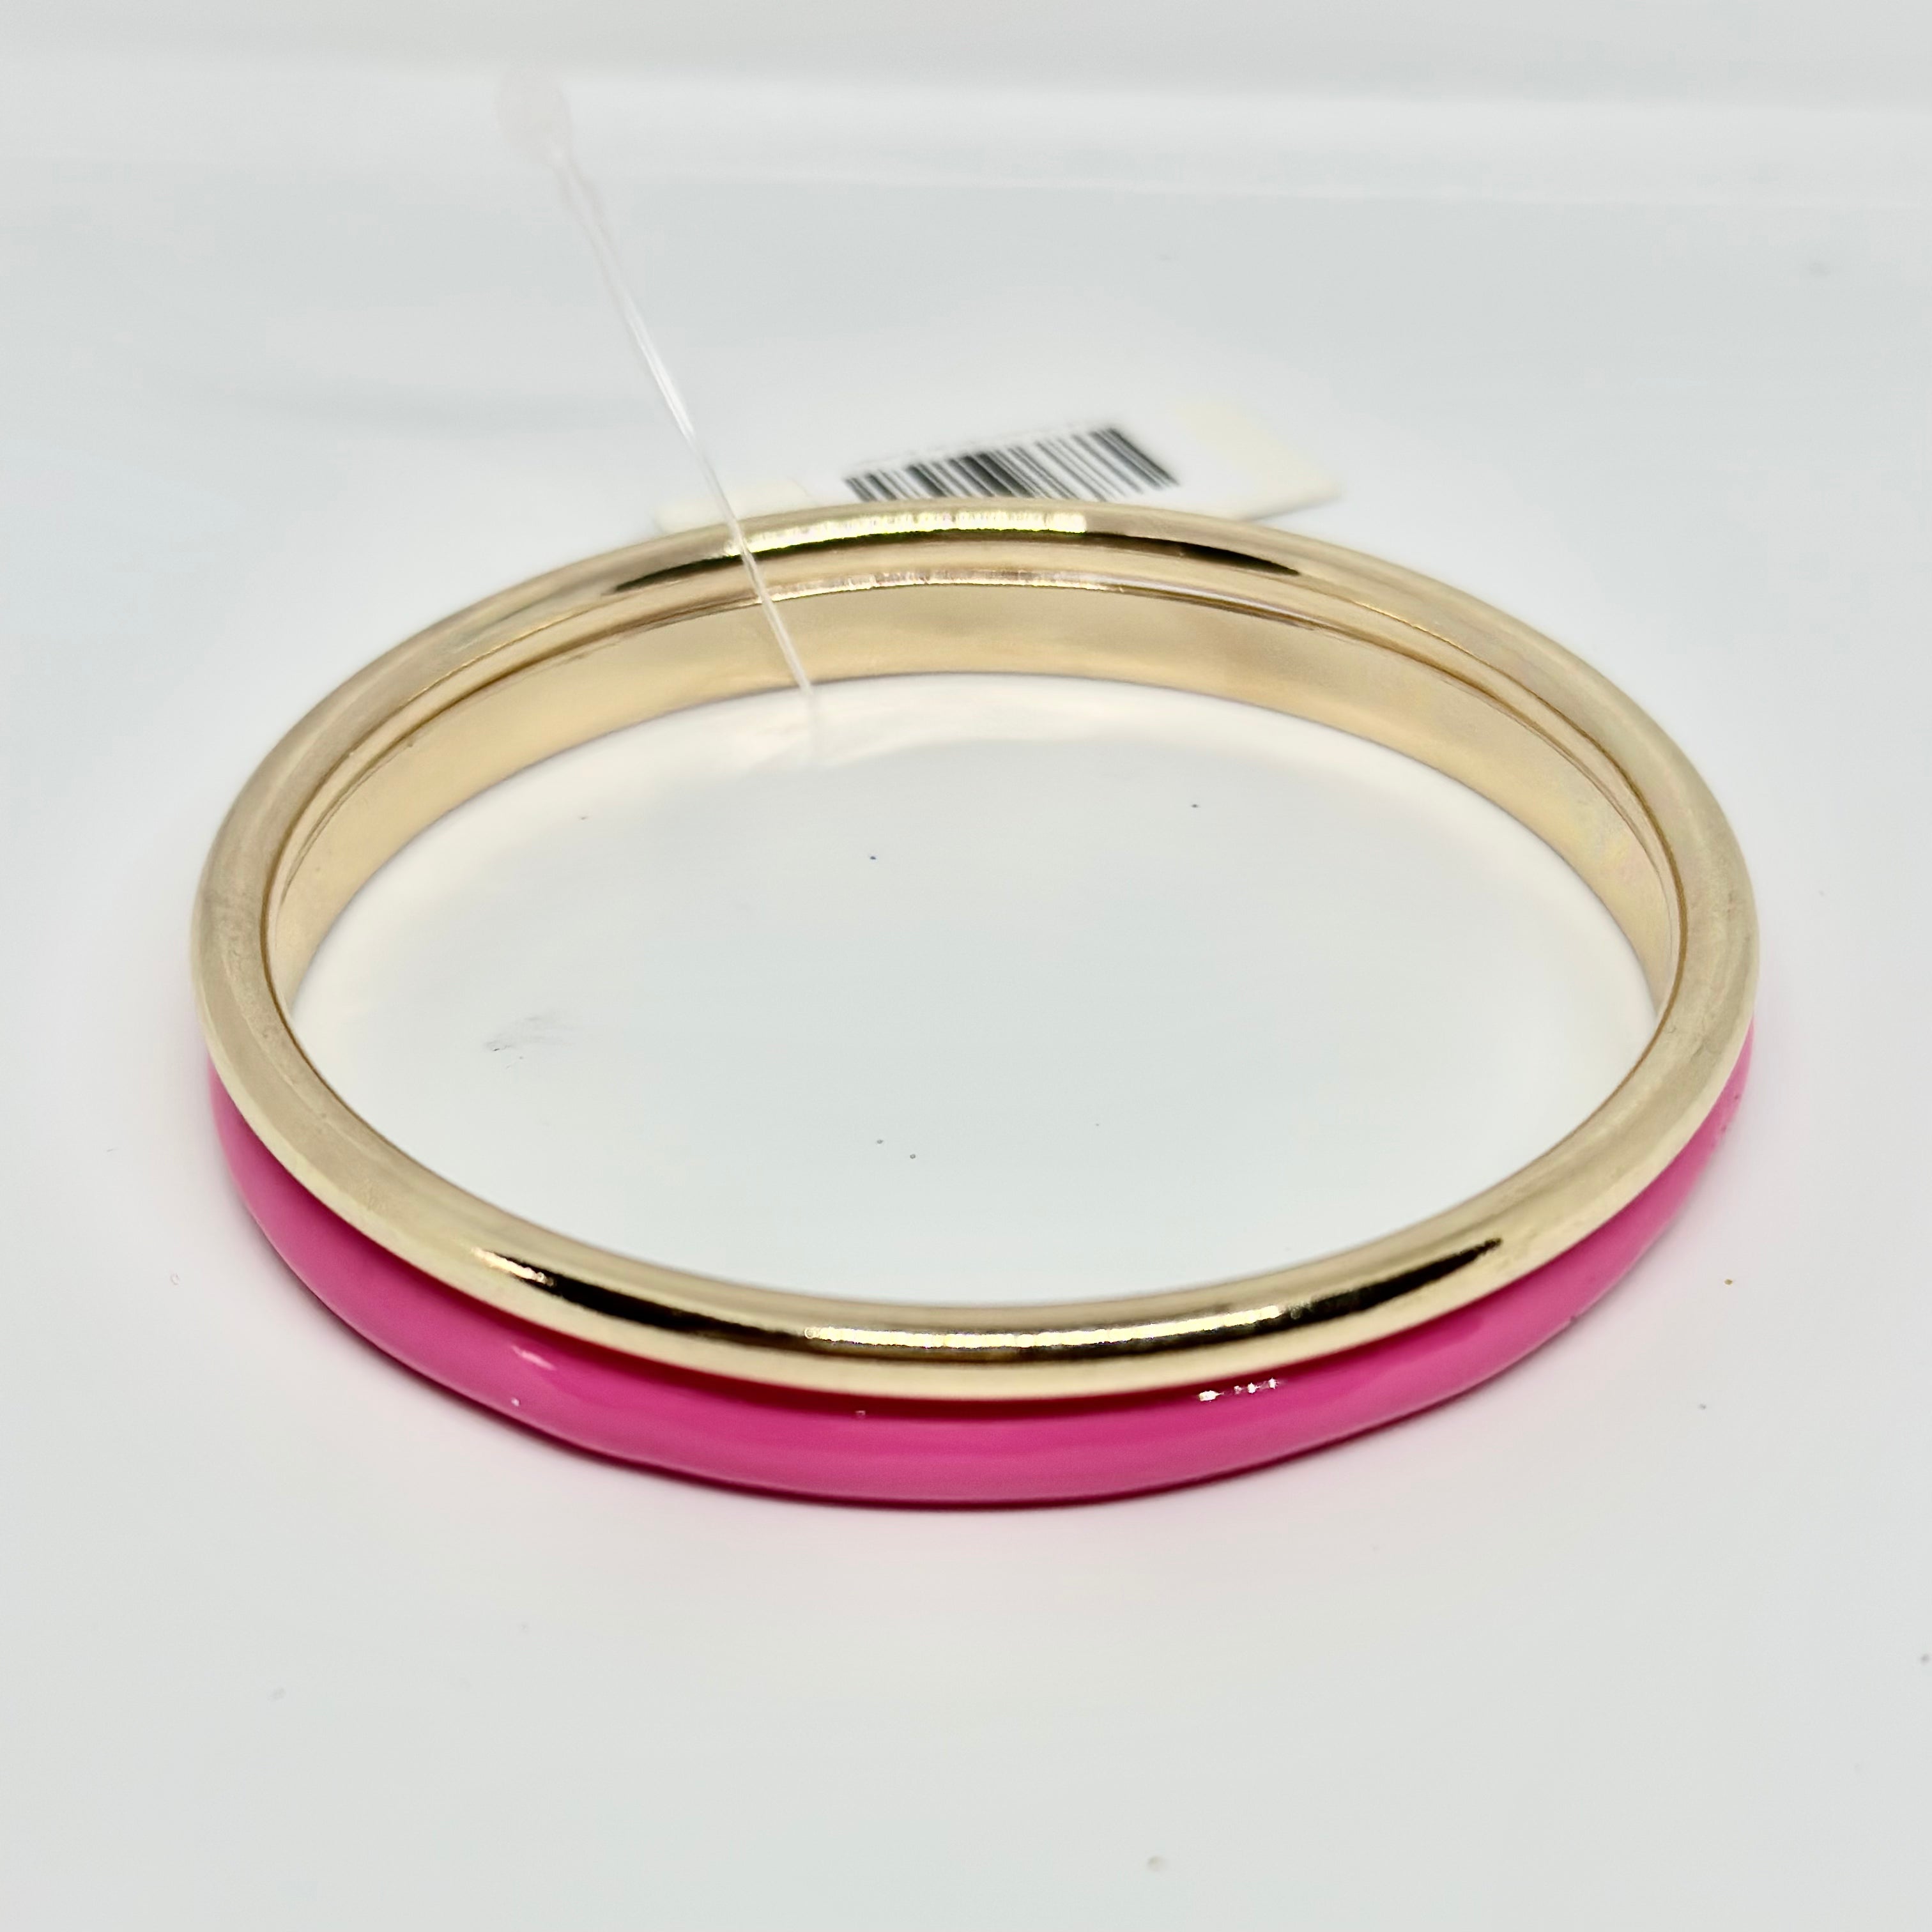 Gold and Colored Metal Bangles